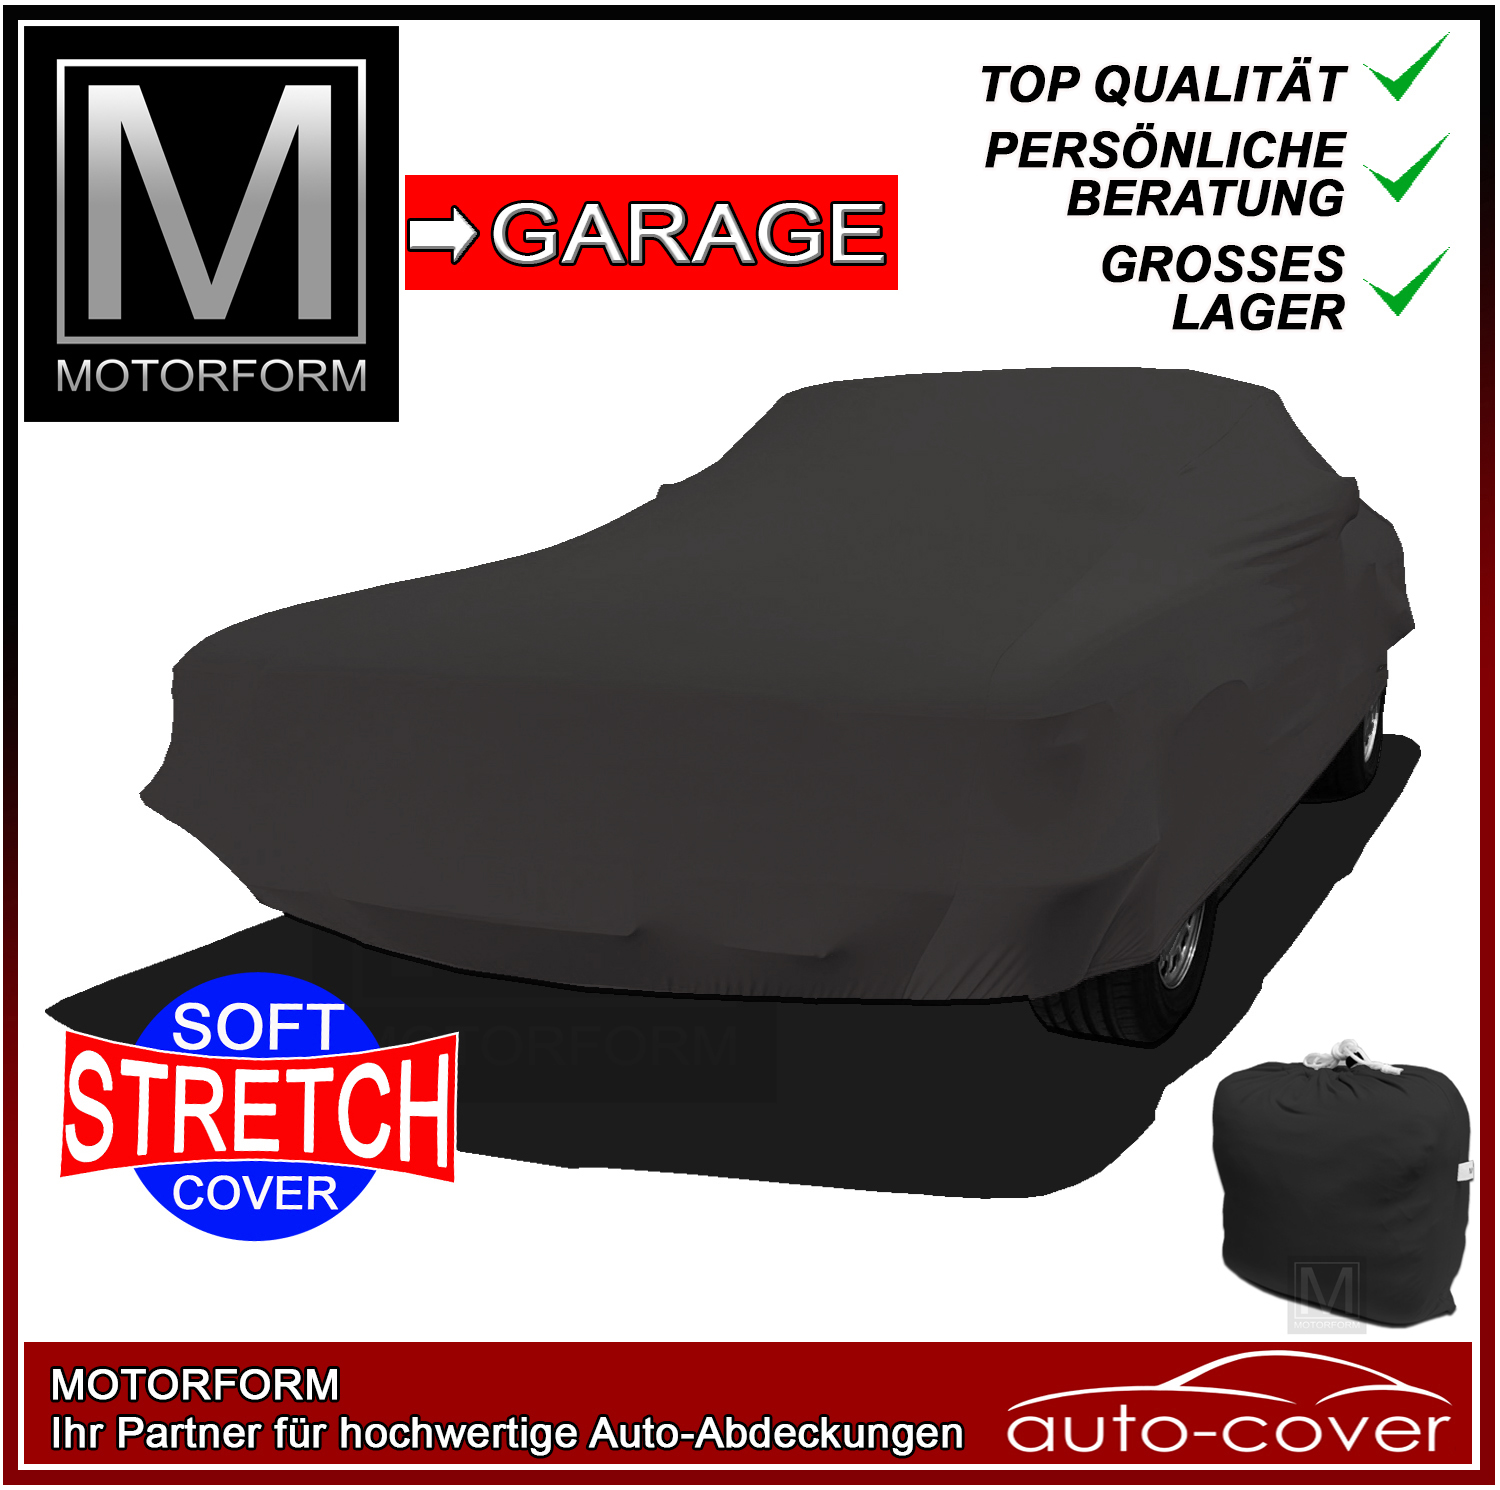 Super Stretchy Cover for Aston Martin DB4, DB4 GT